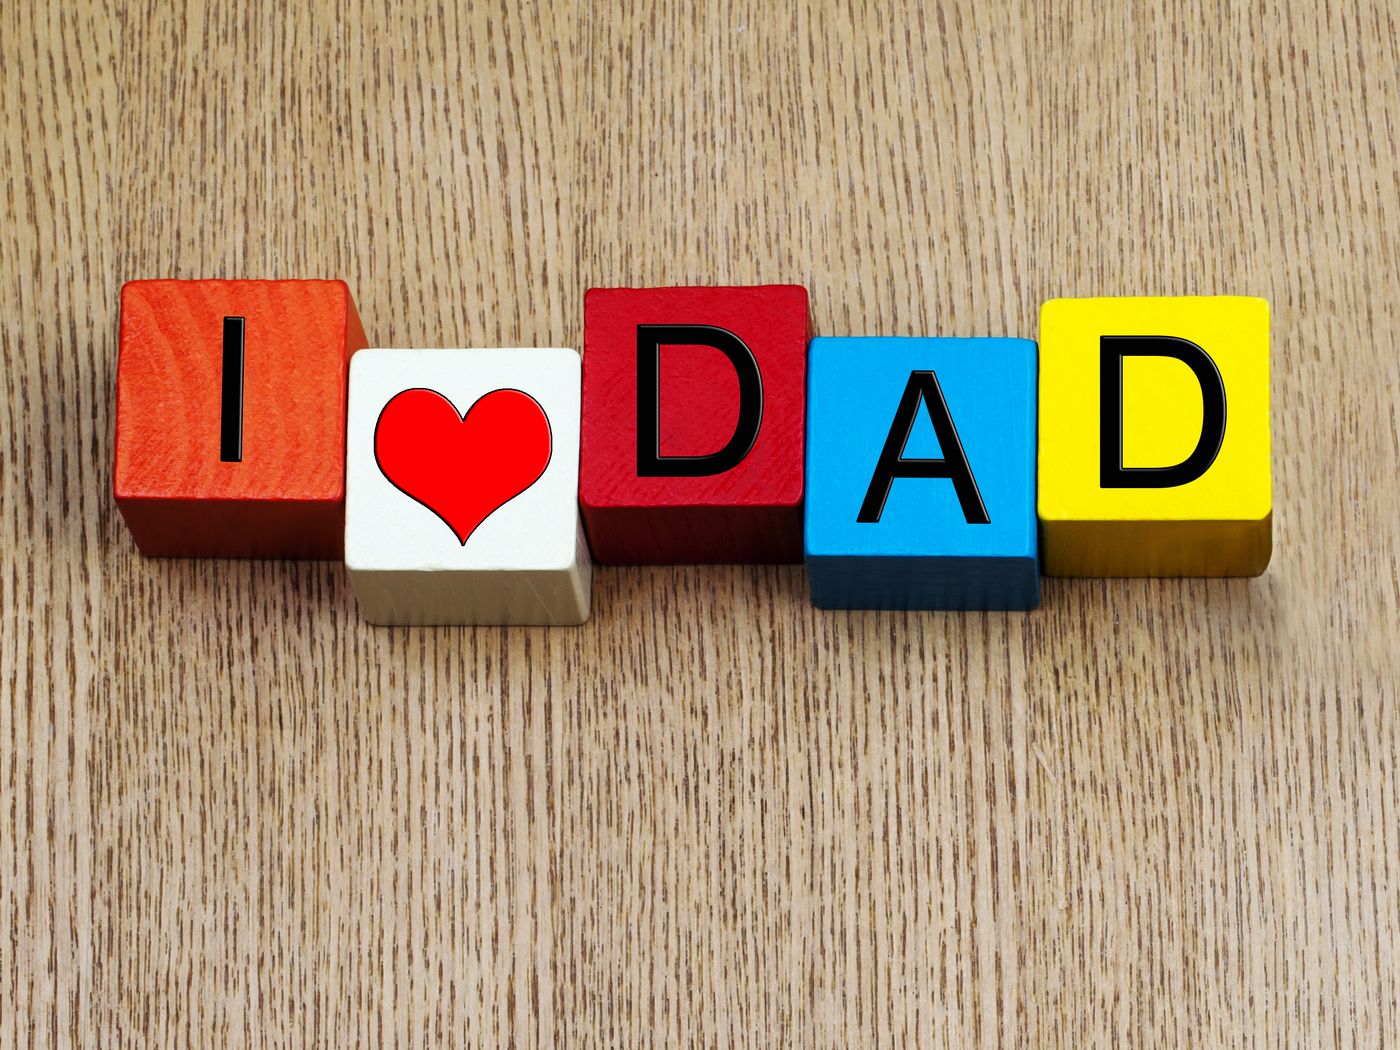 Get Creative For Father’s Day!